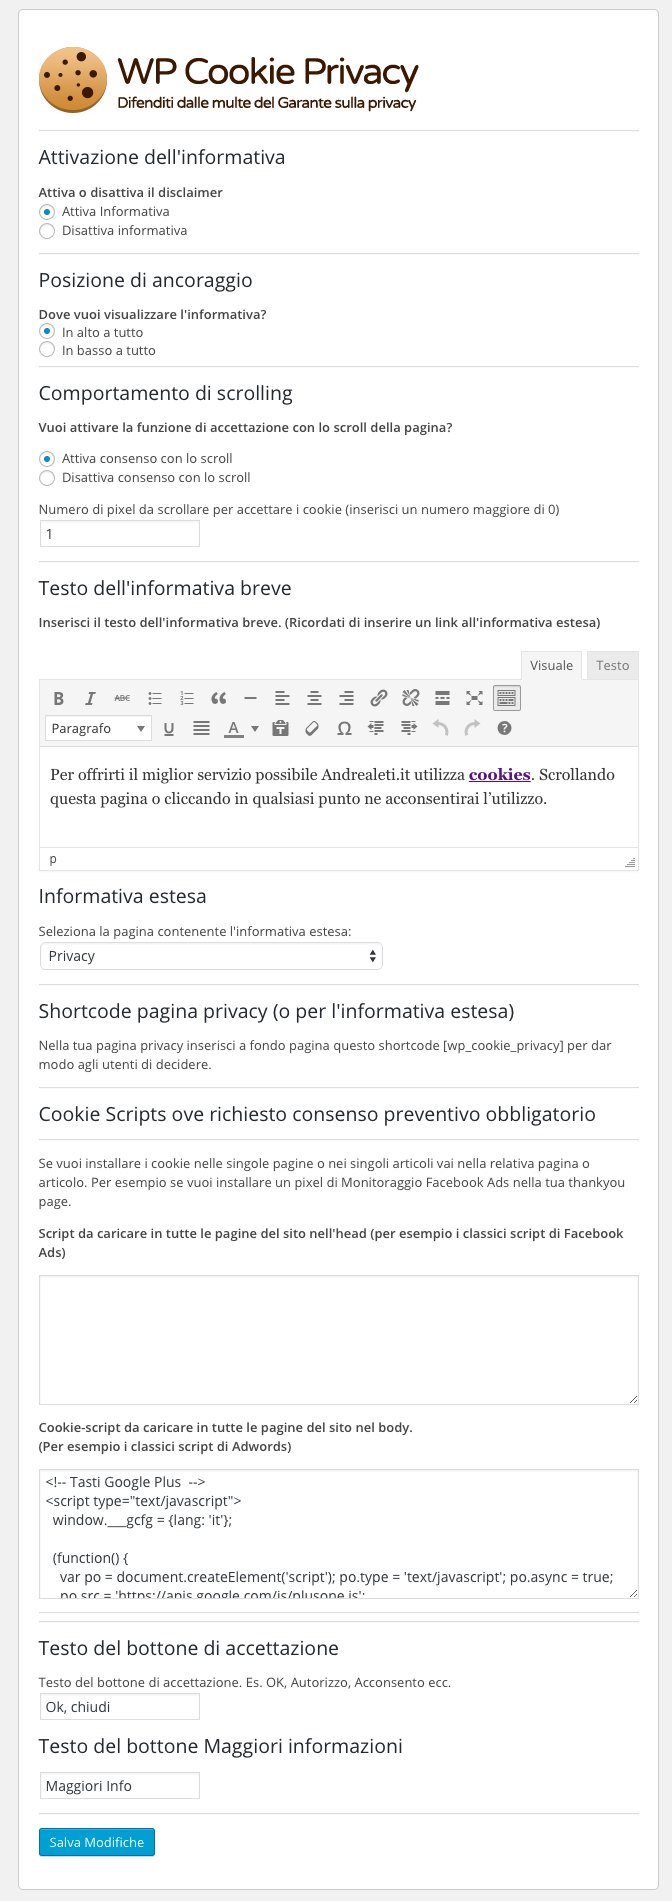 wp cookie privacy